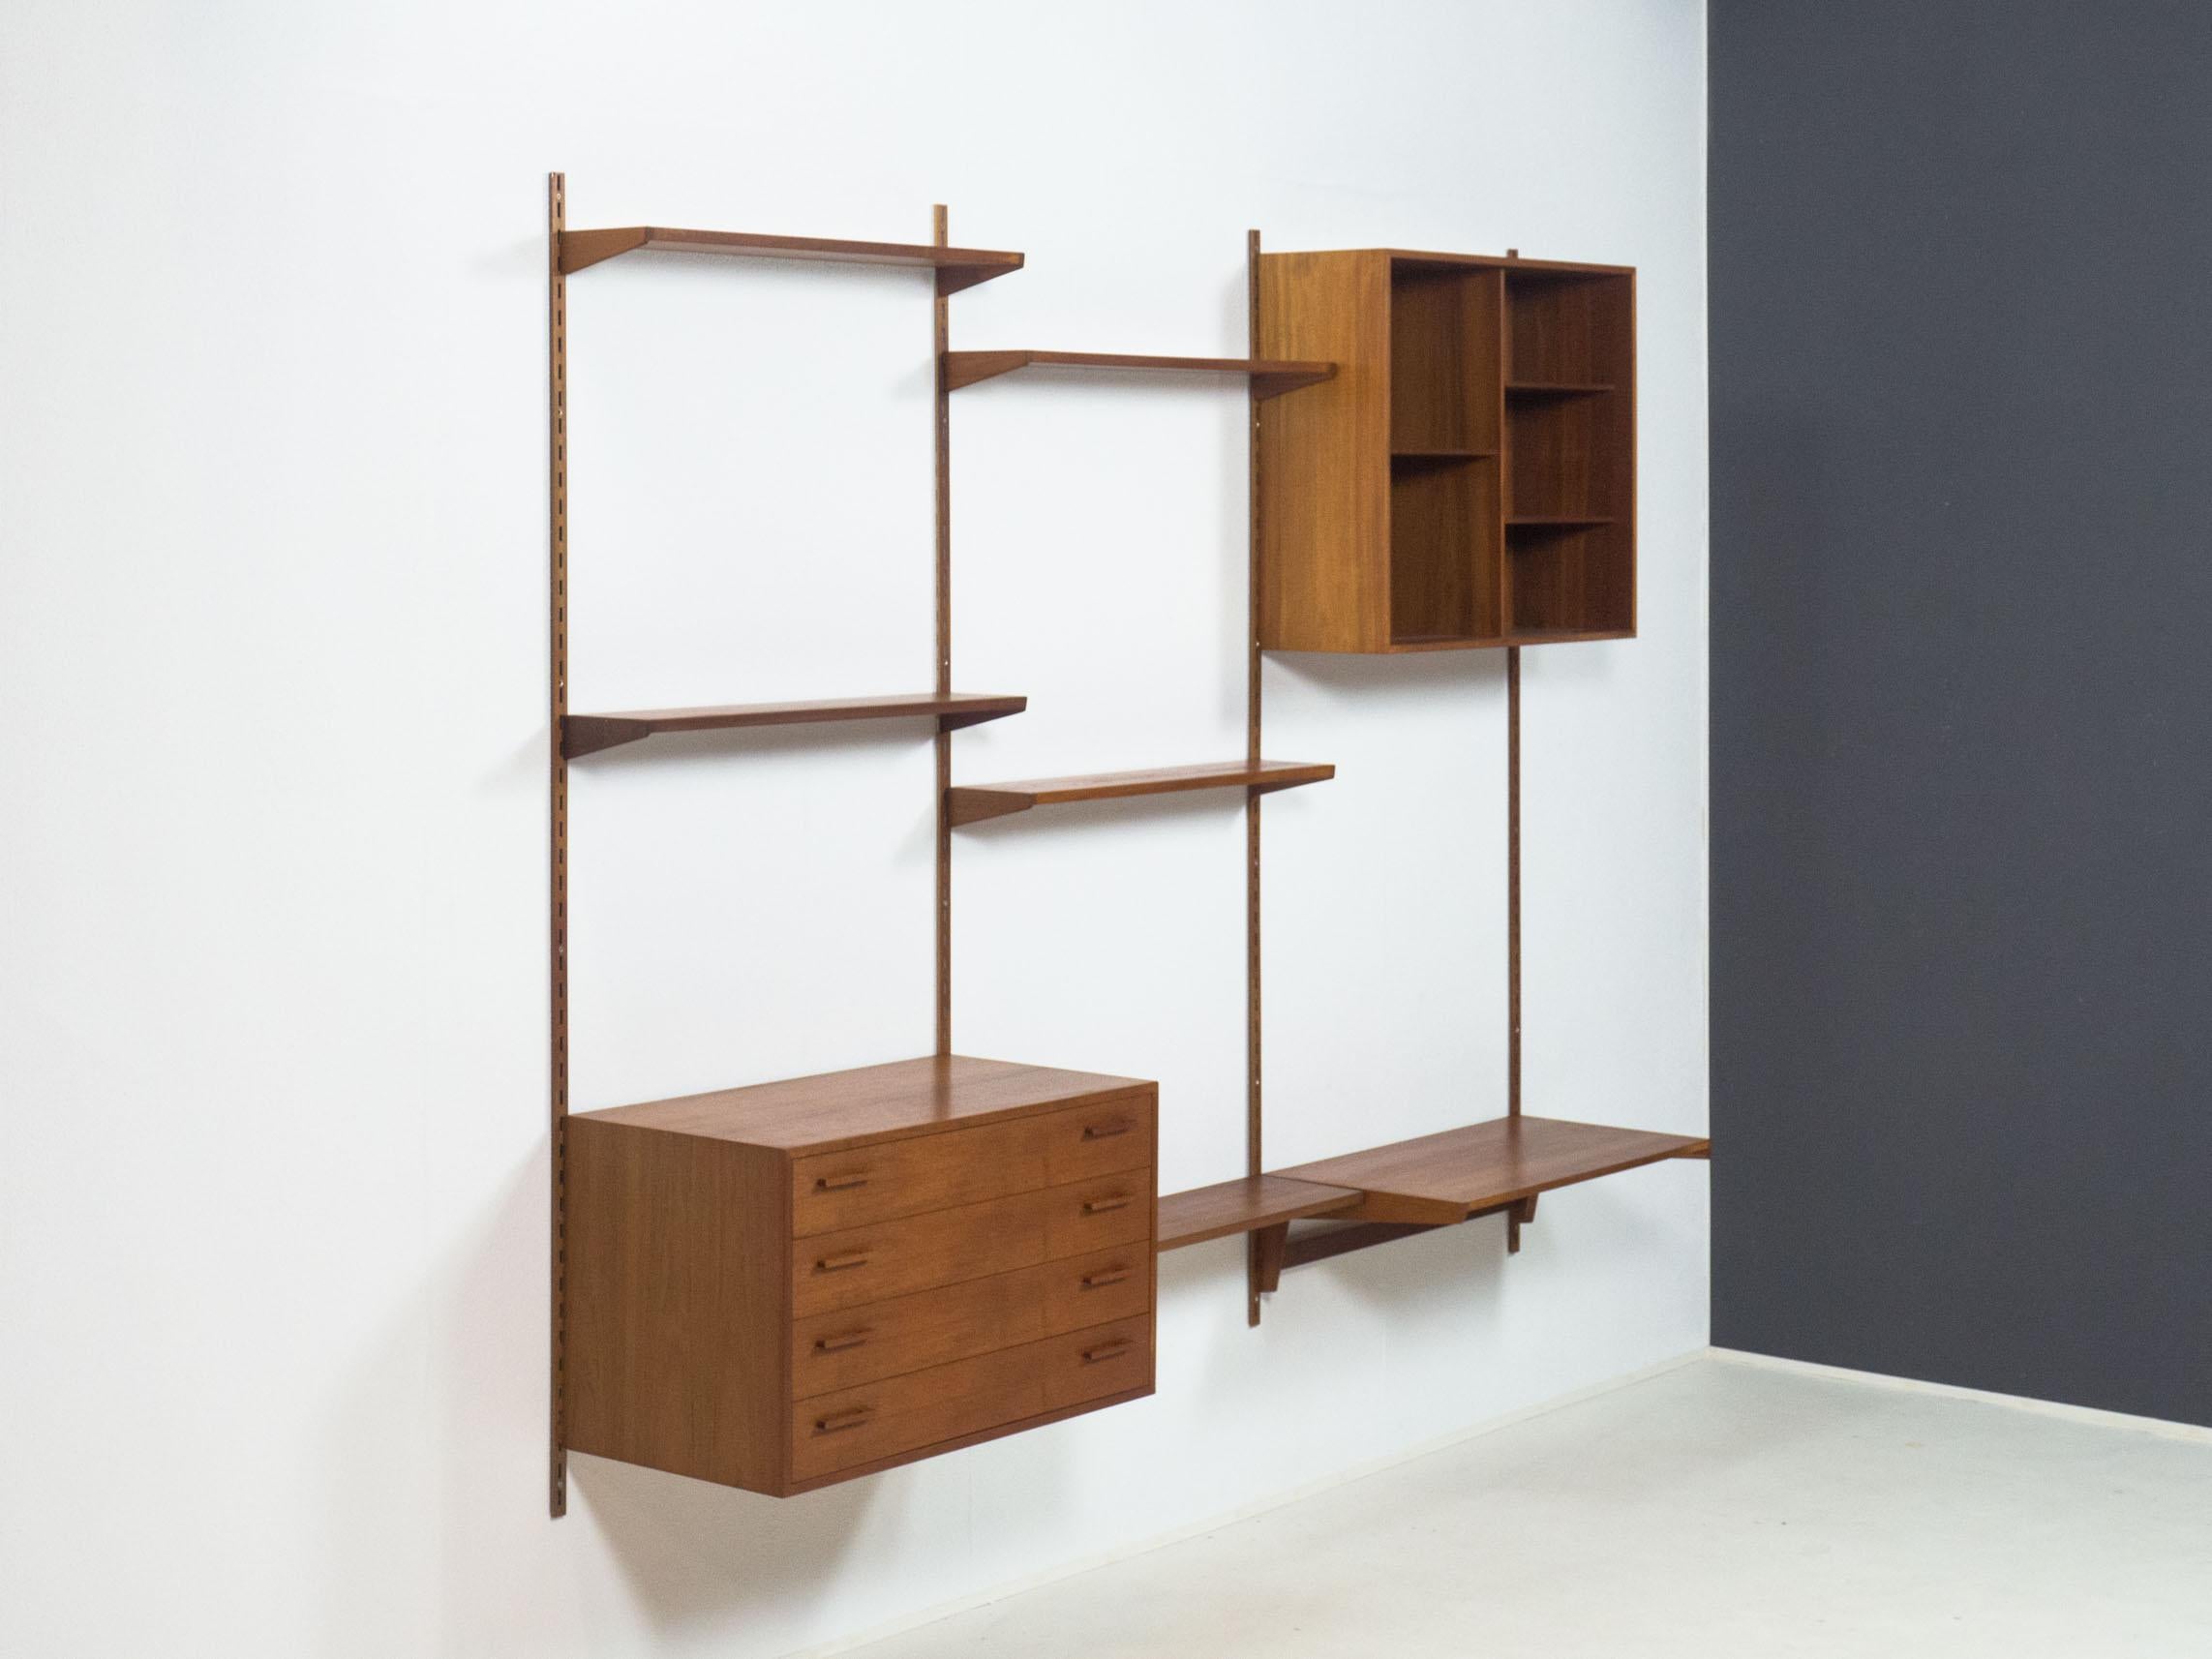 Wall unit designed by Kai Kristiansen for Feldballes Møbelfabrik, Denmark in the 1960s.

This wall unit is completely veneered in teak, including the wall rails. The sides of the shelves and the drawer handles are made of solid teak.

The unit